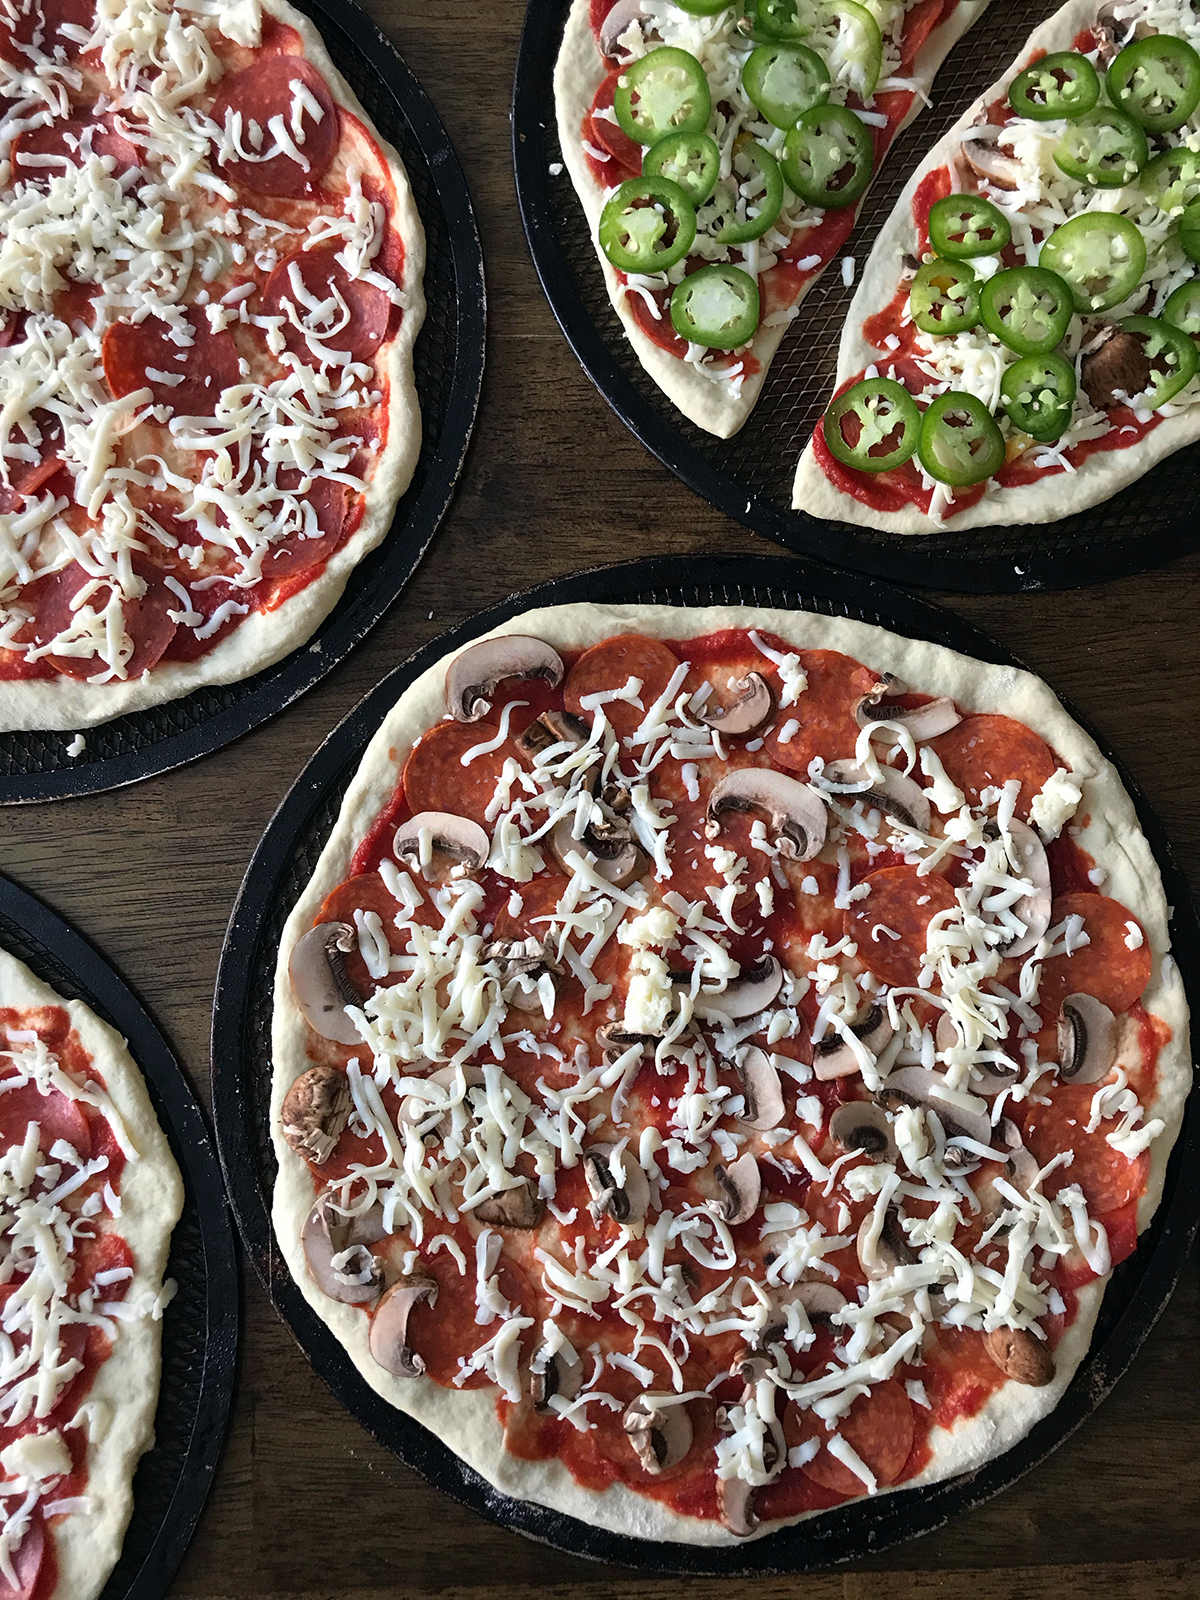 unbaked pizzas on screens on table